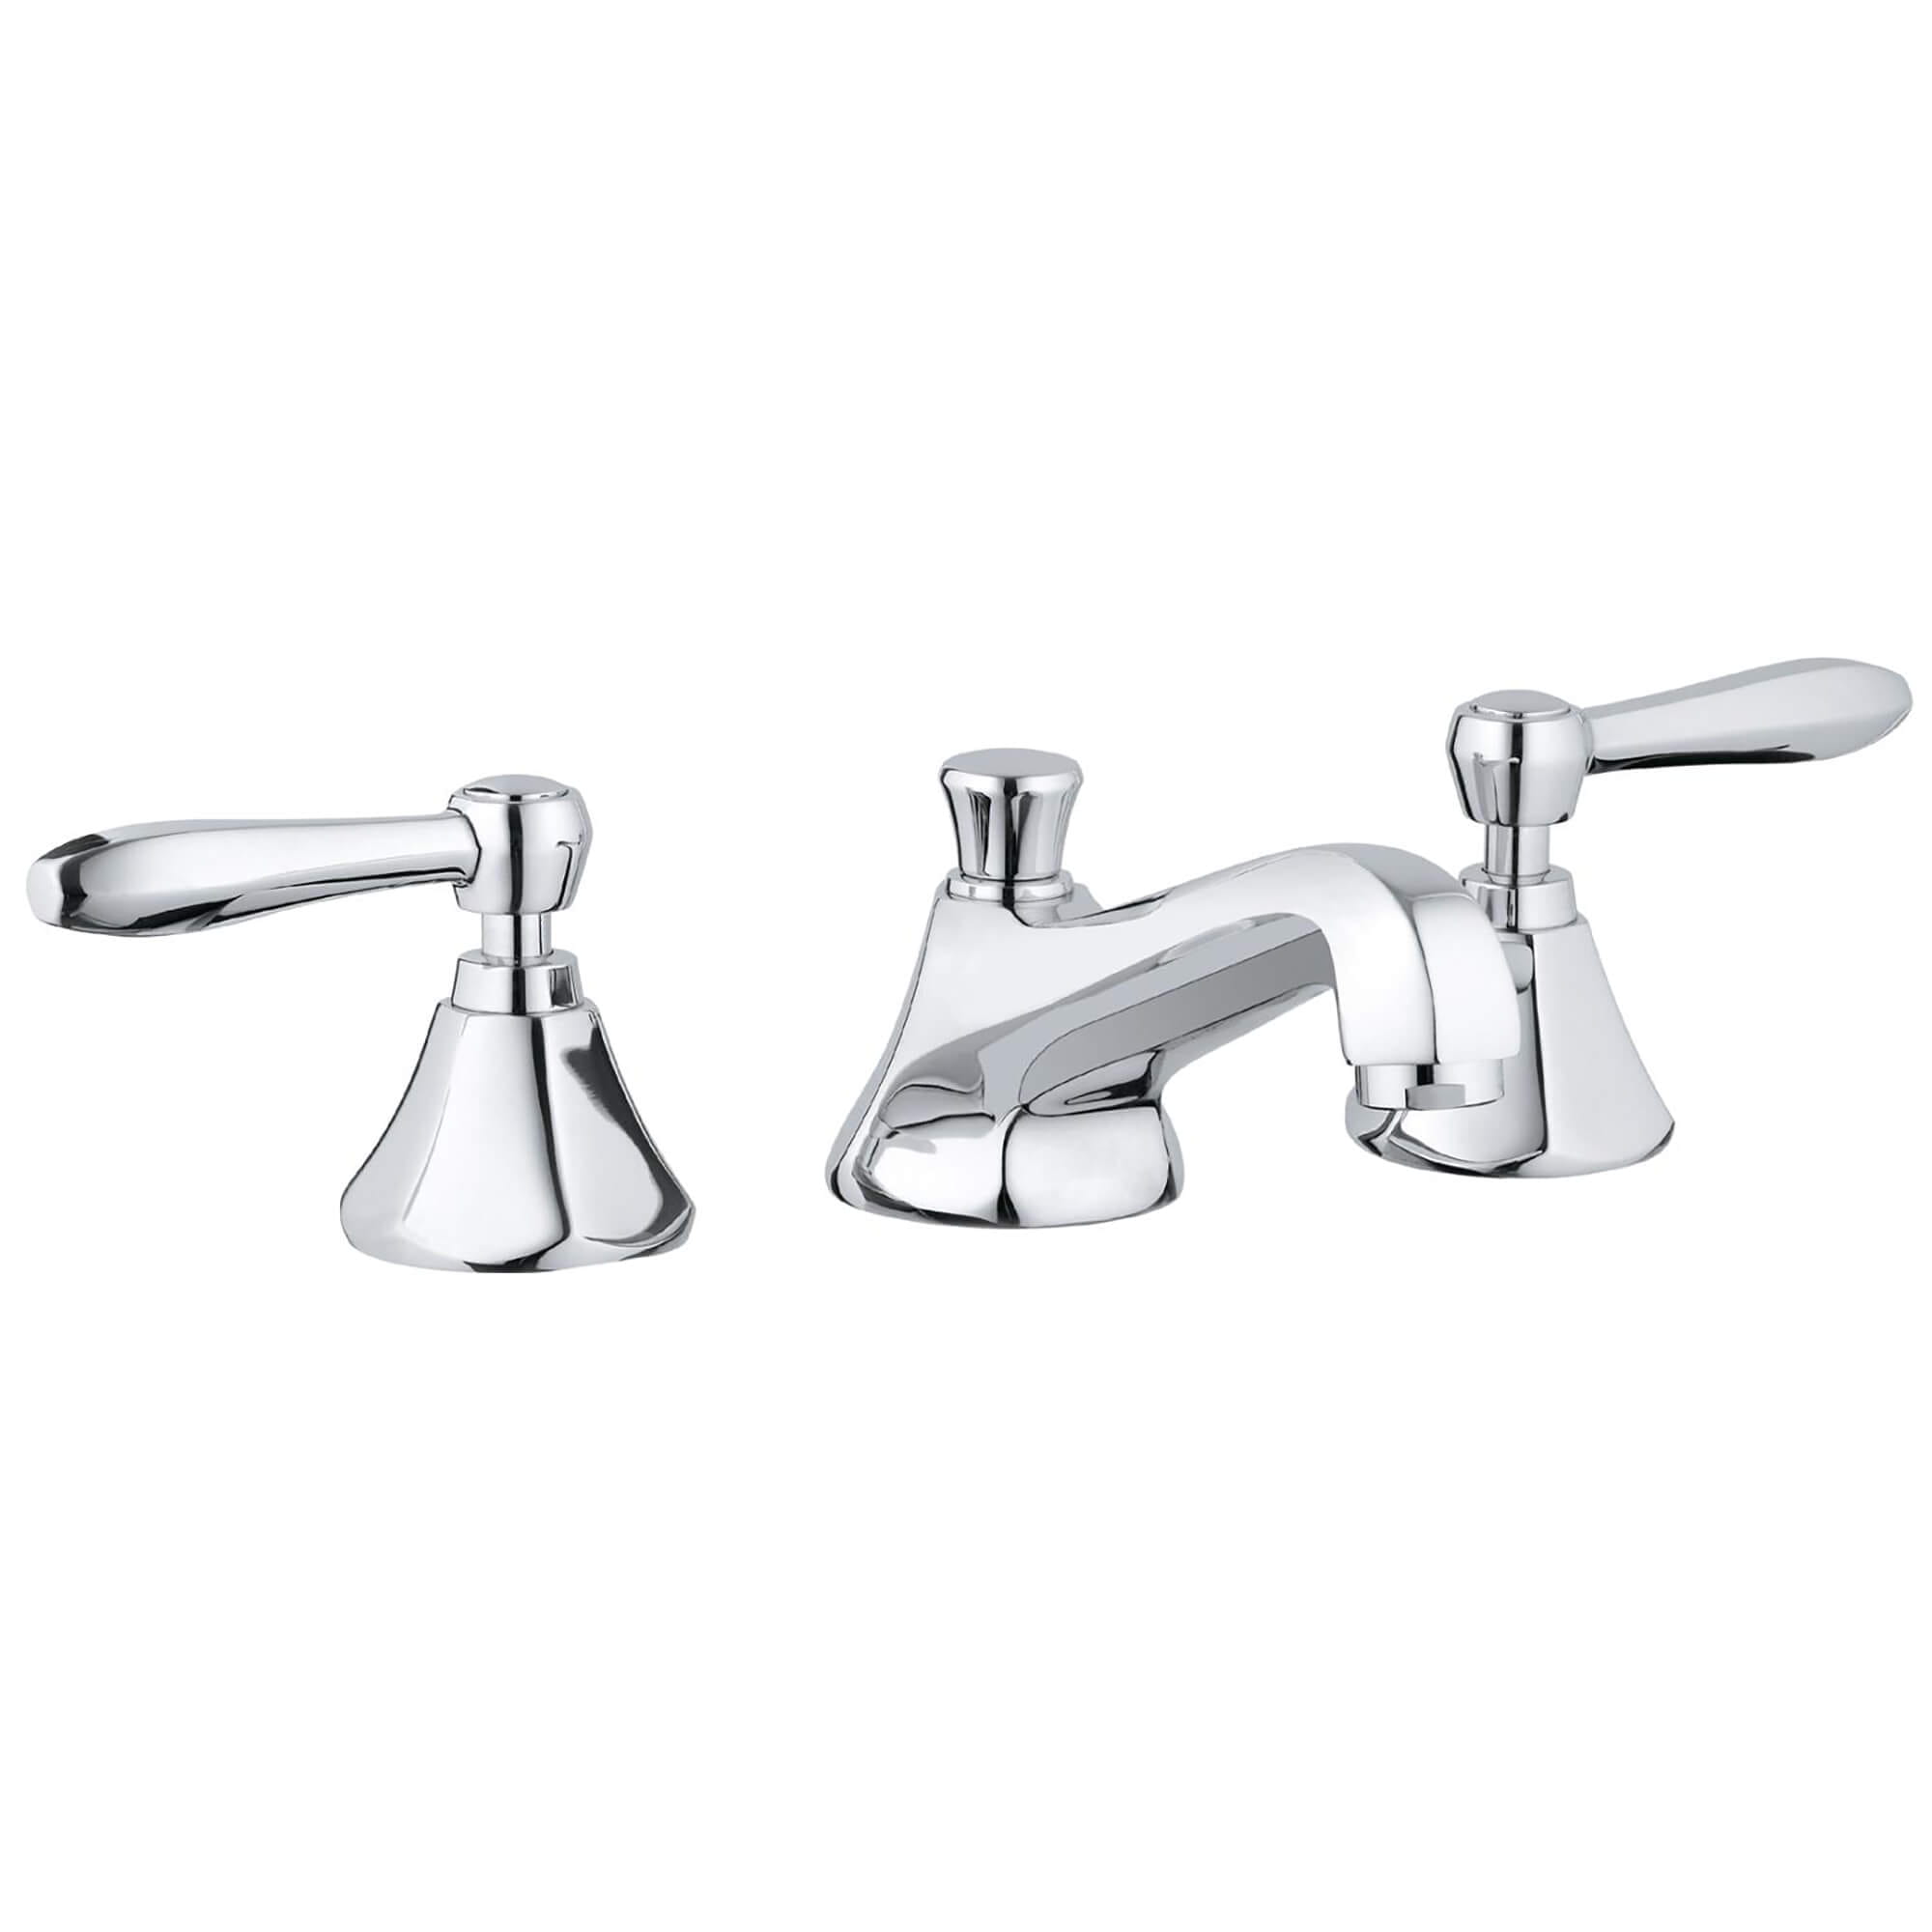 Somerset Lavatory Wideset 12 gpm GROHE BRUSHED NICKEL